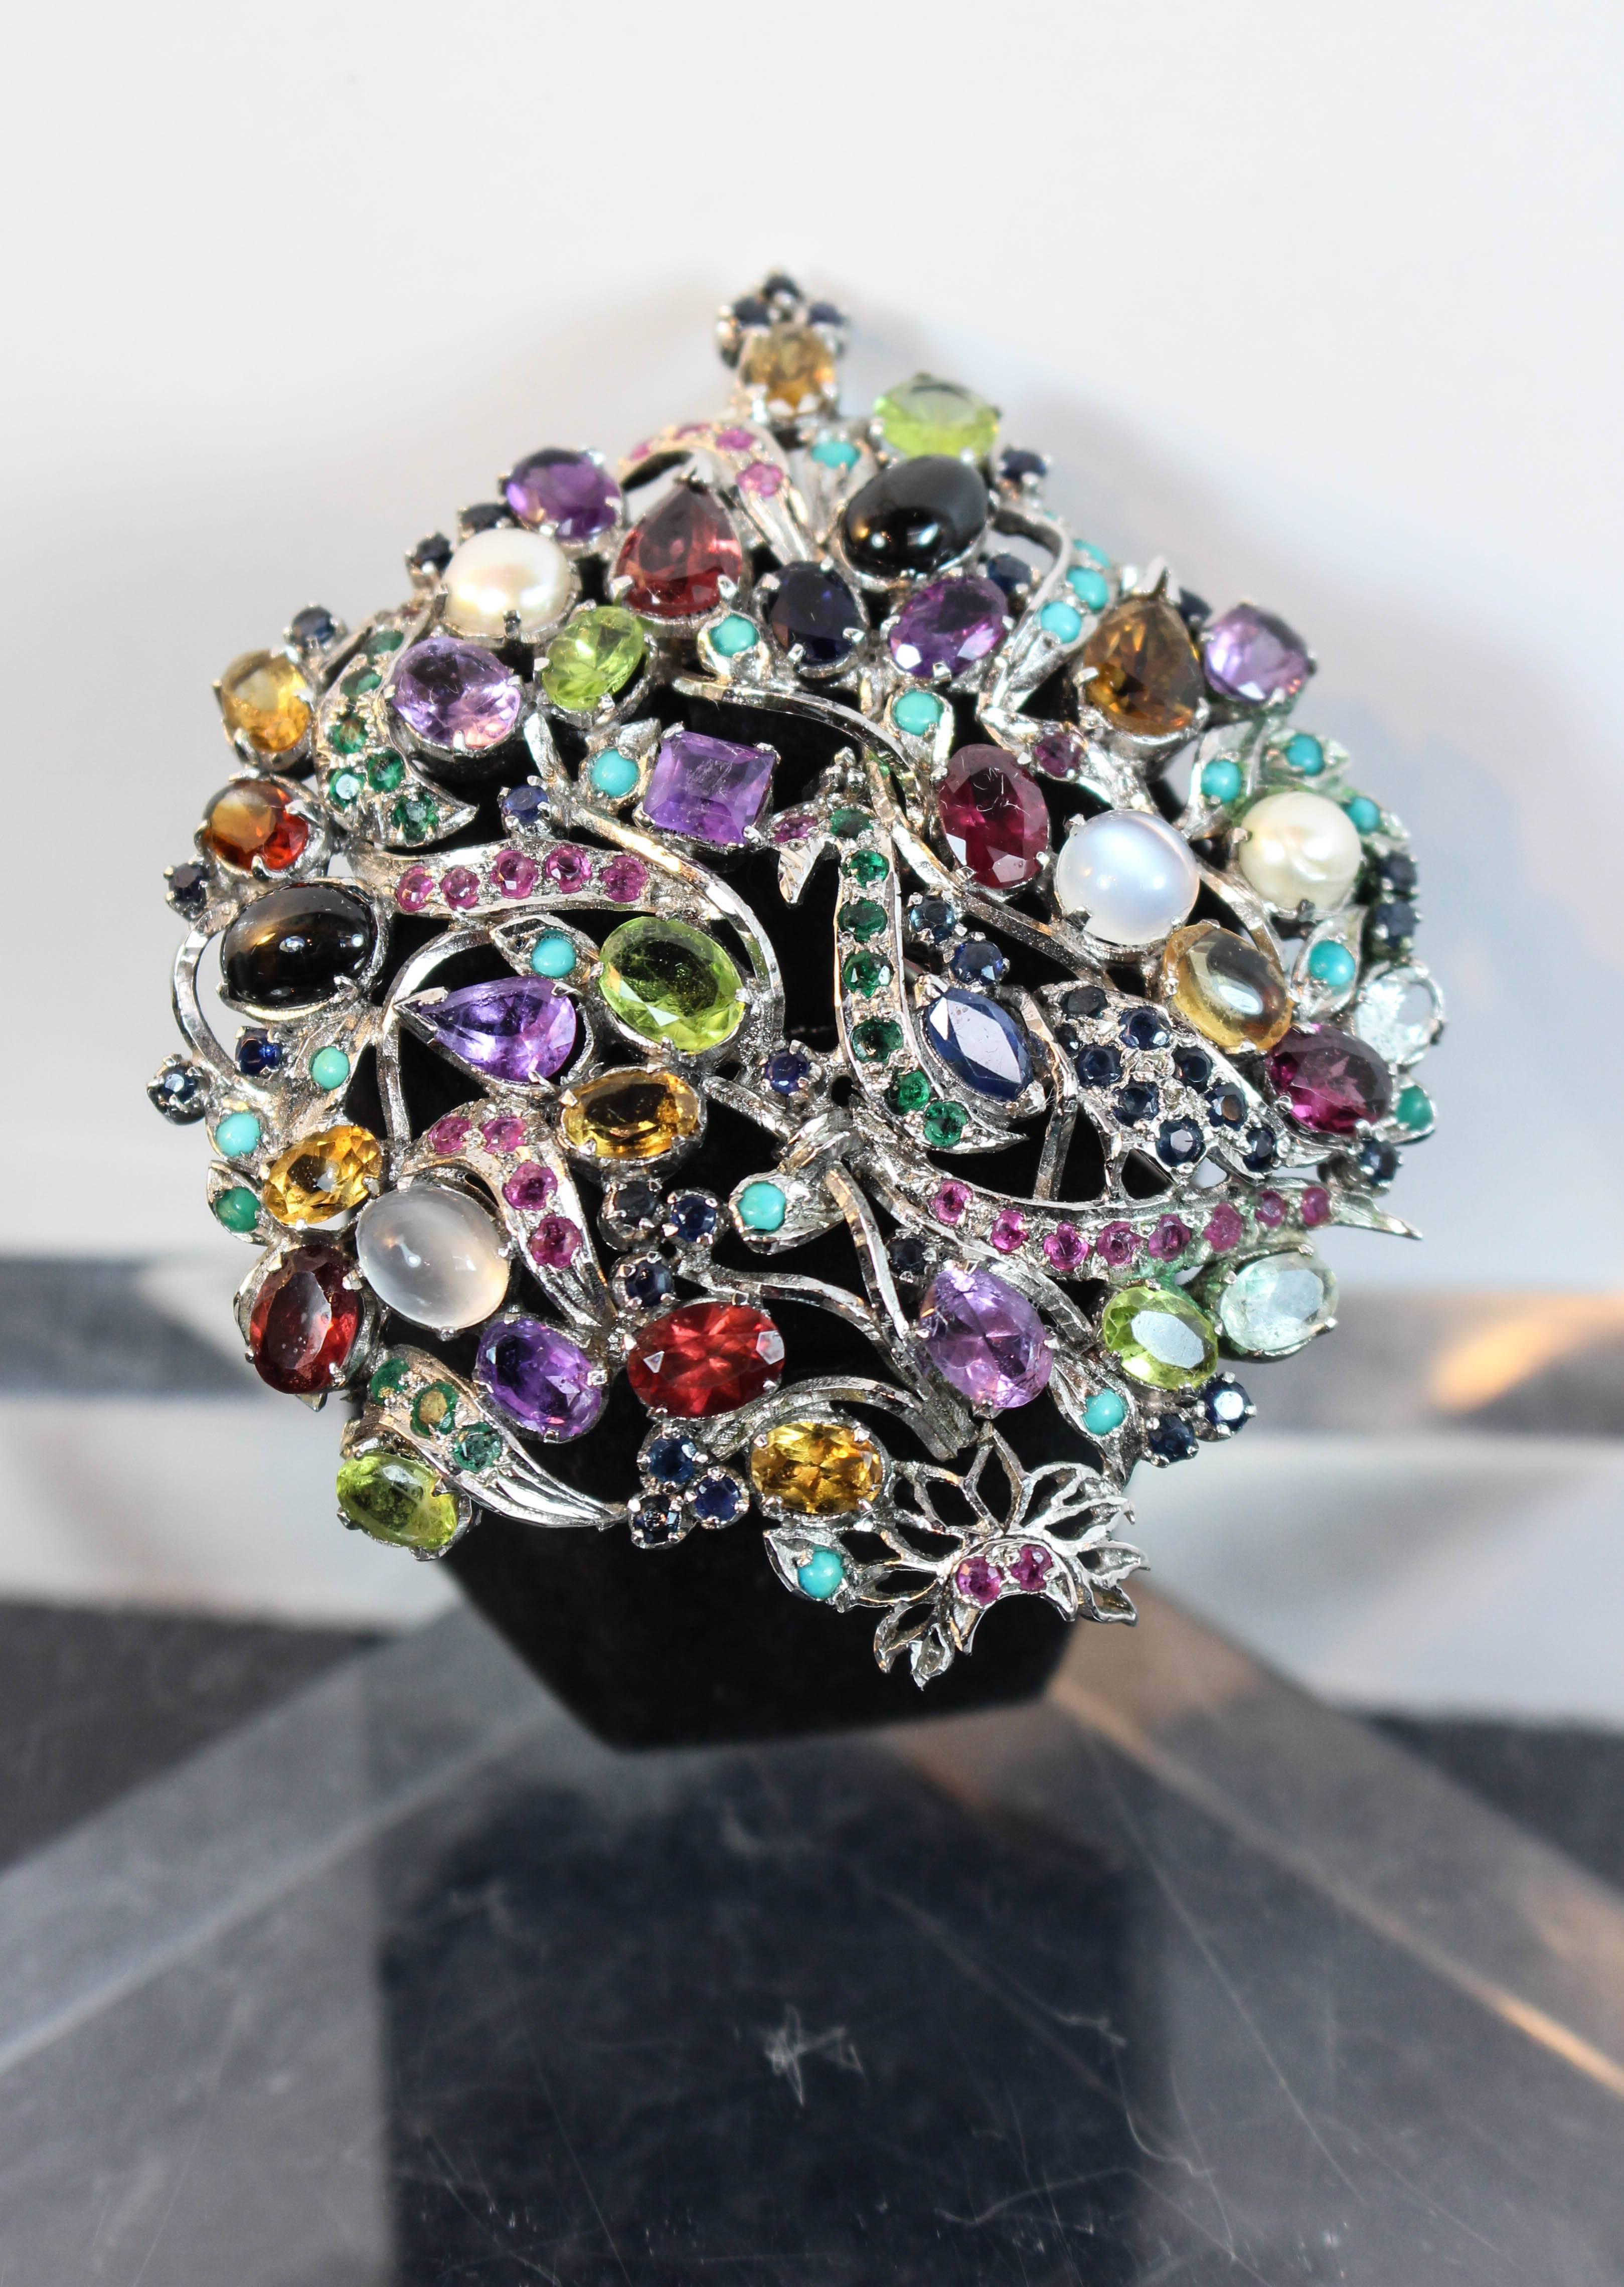 This brooch is composed of a silver hue metal set with semi precious stones. Can be styled as a brooch or pendant. In excellent vintage condition.

**Please cross-reference measurements for personal accuracy. Size in description box is an